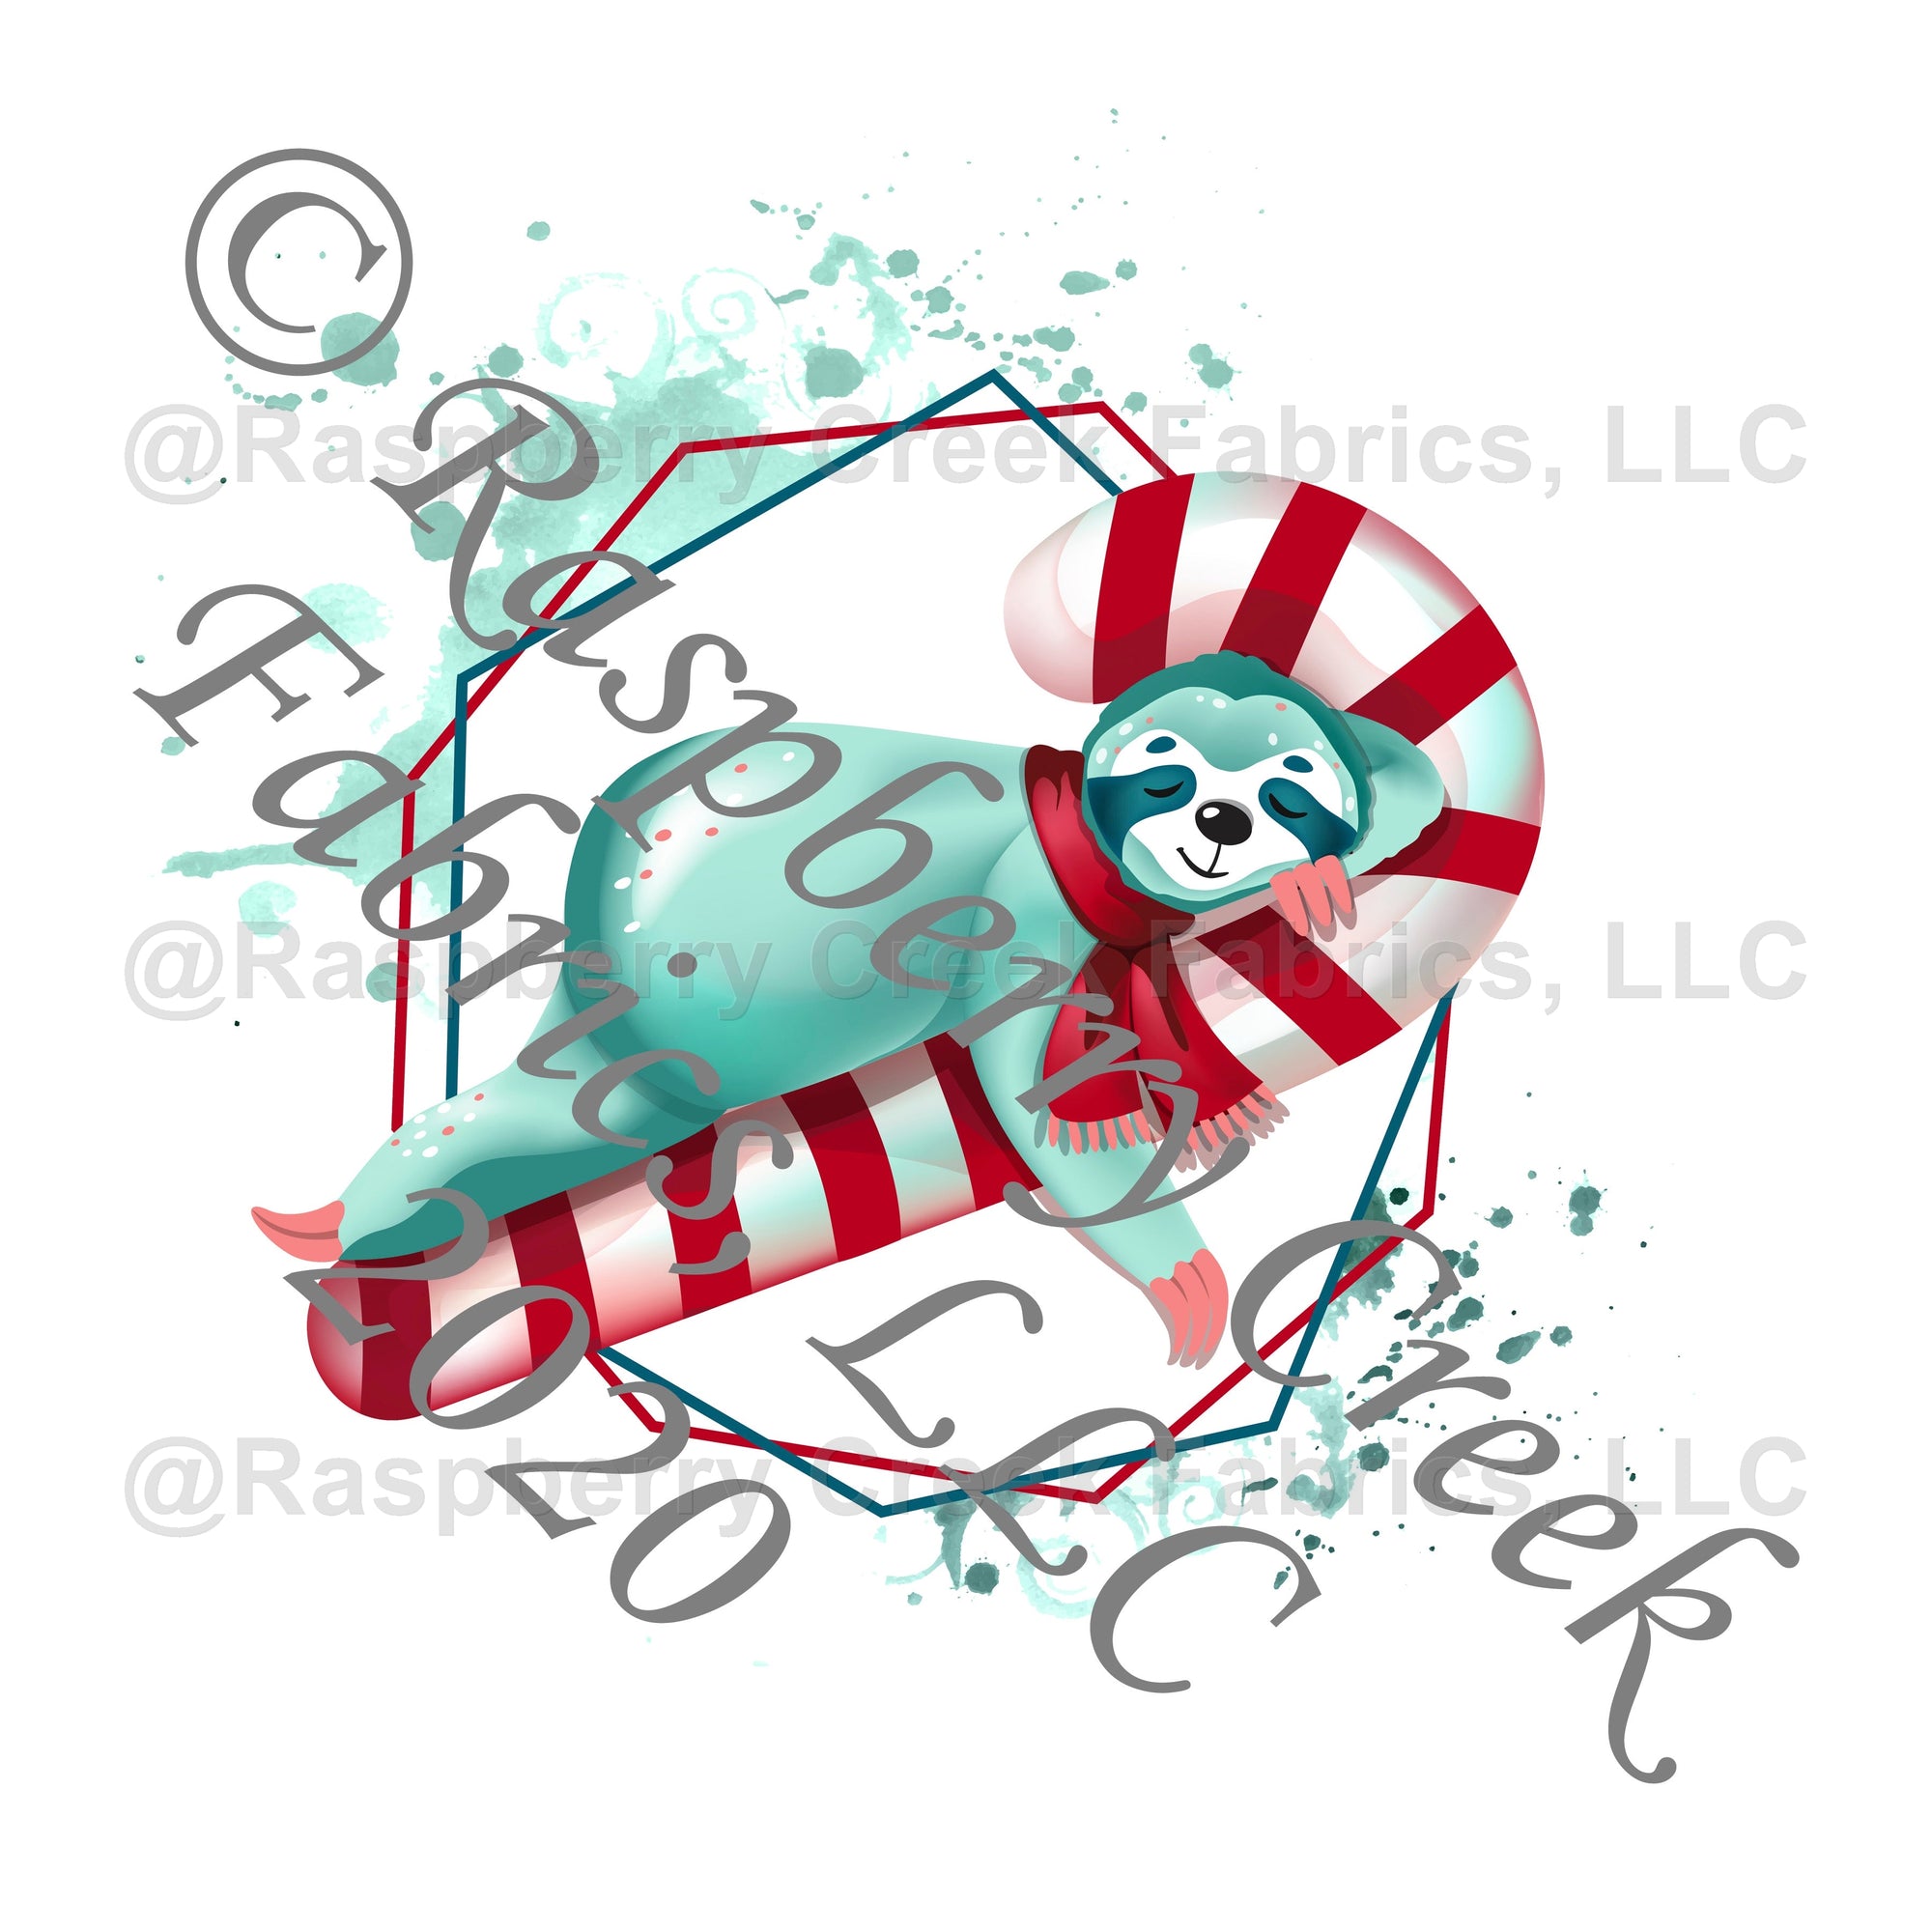 Mint Red and Teal Sloth Candy Cane Panel, Whimsical Christmas By Tonya Knowlden for Club Fabrics Fabric, Raspberry Creek Fabrics, watermarked